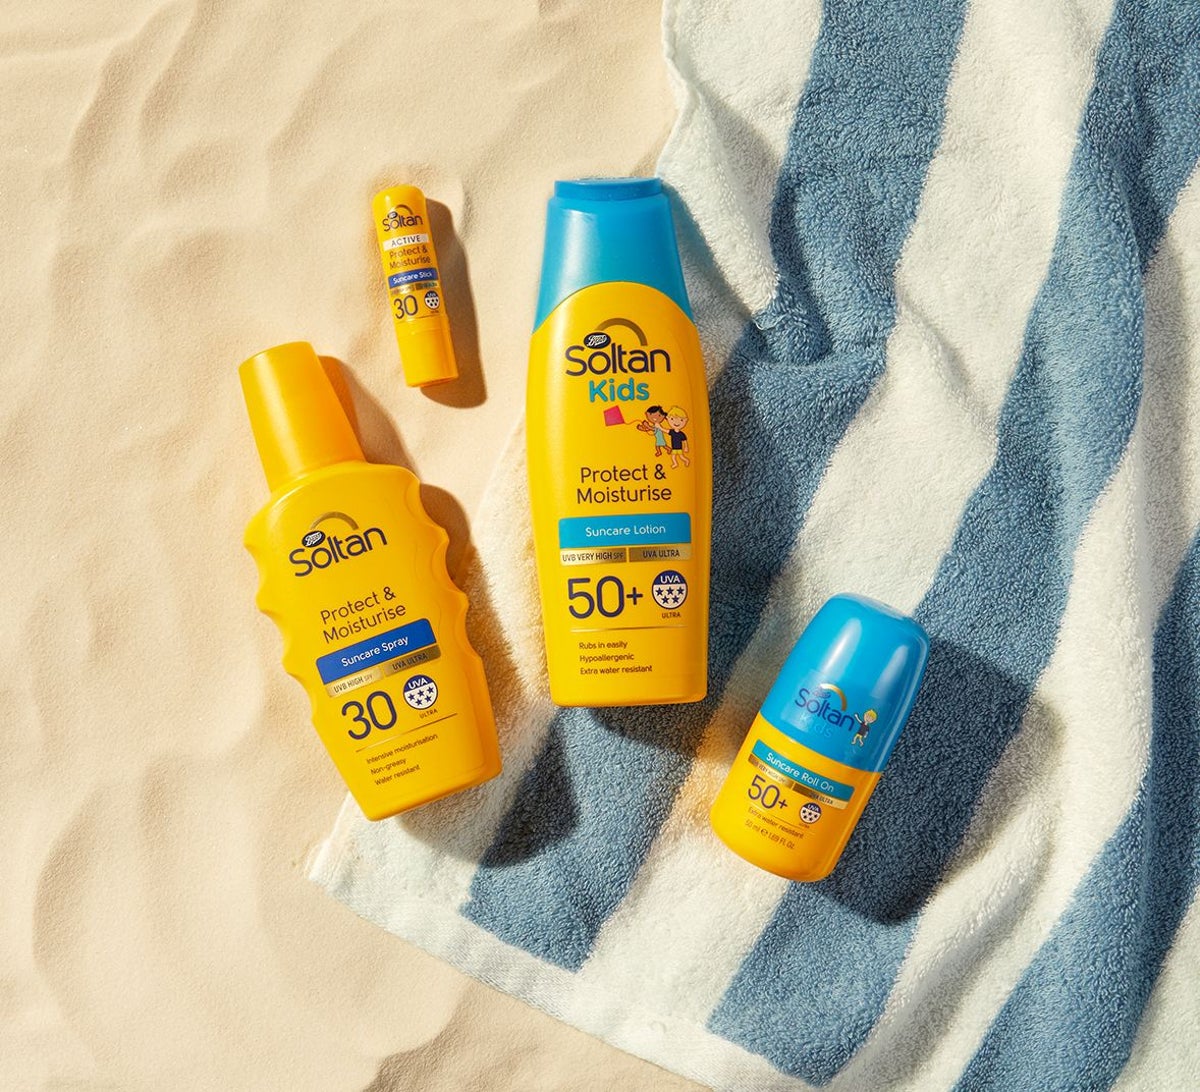 Sunscreen brand to stop producing lowest SPF products to encourage safety